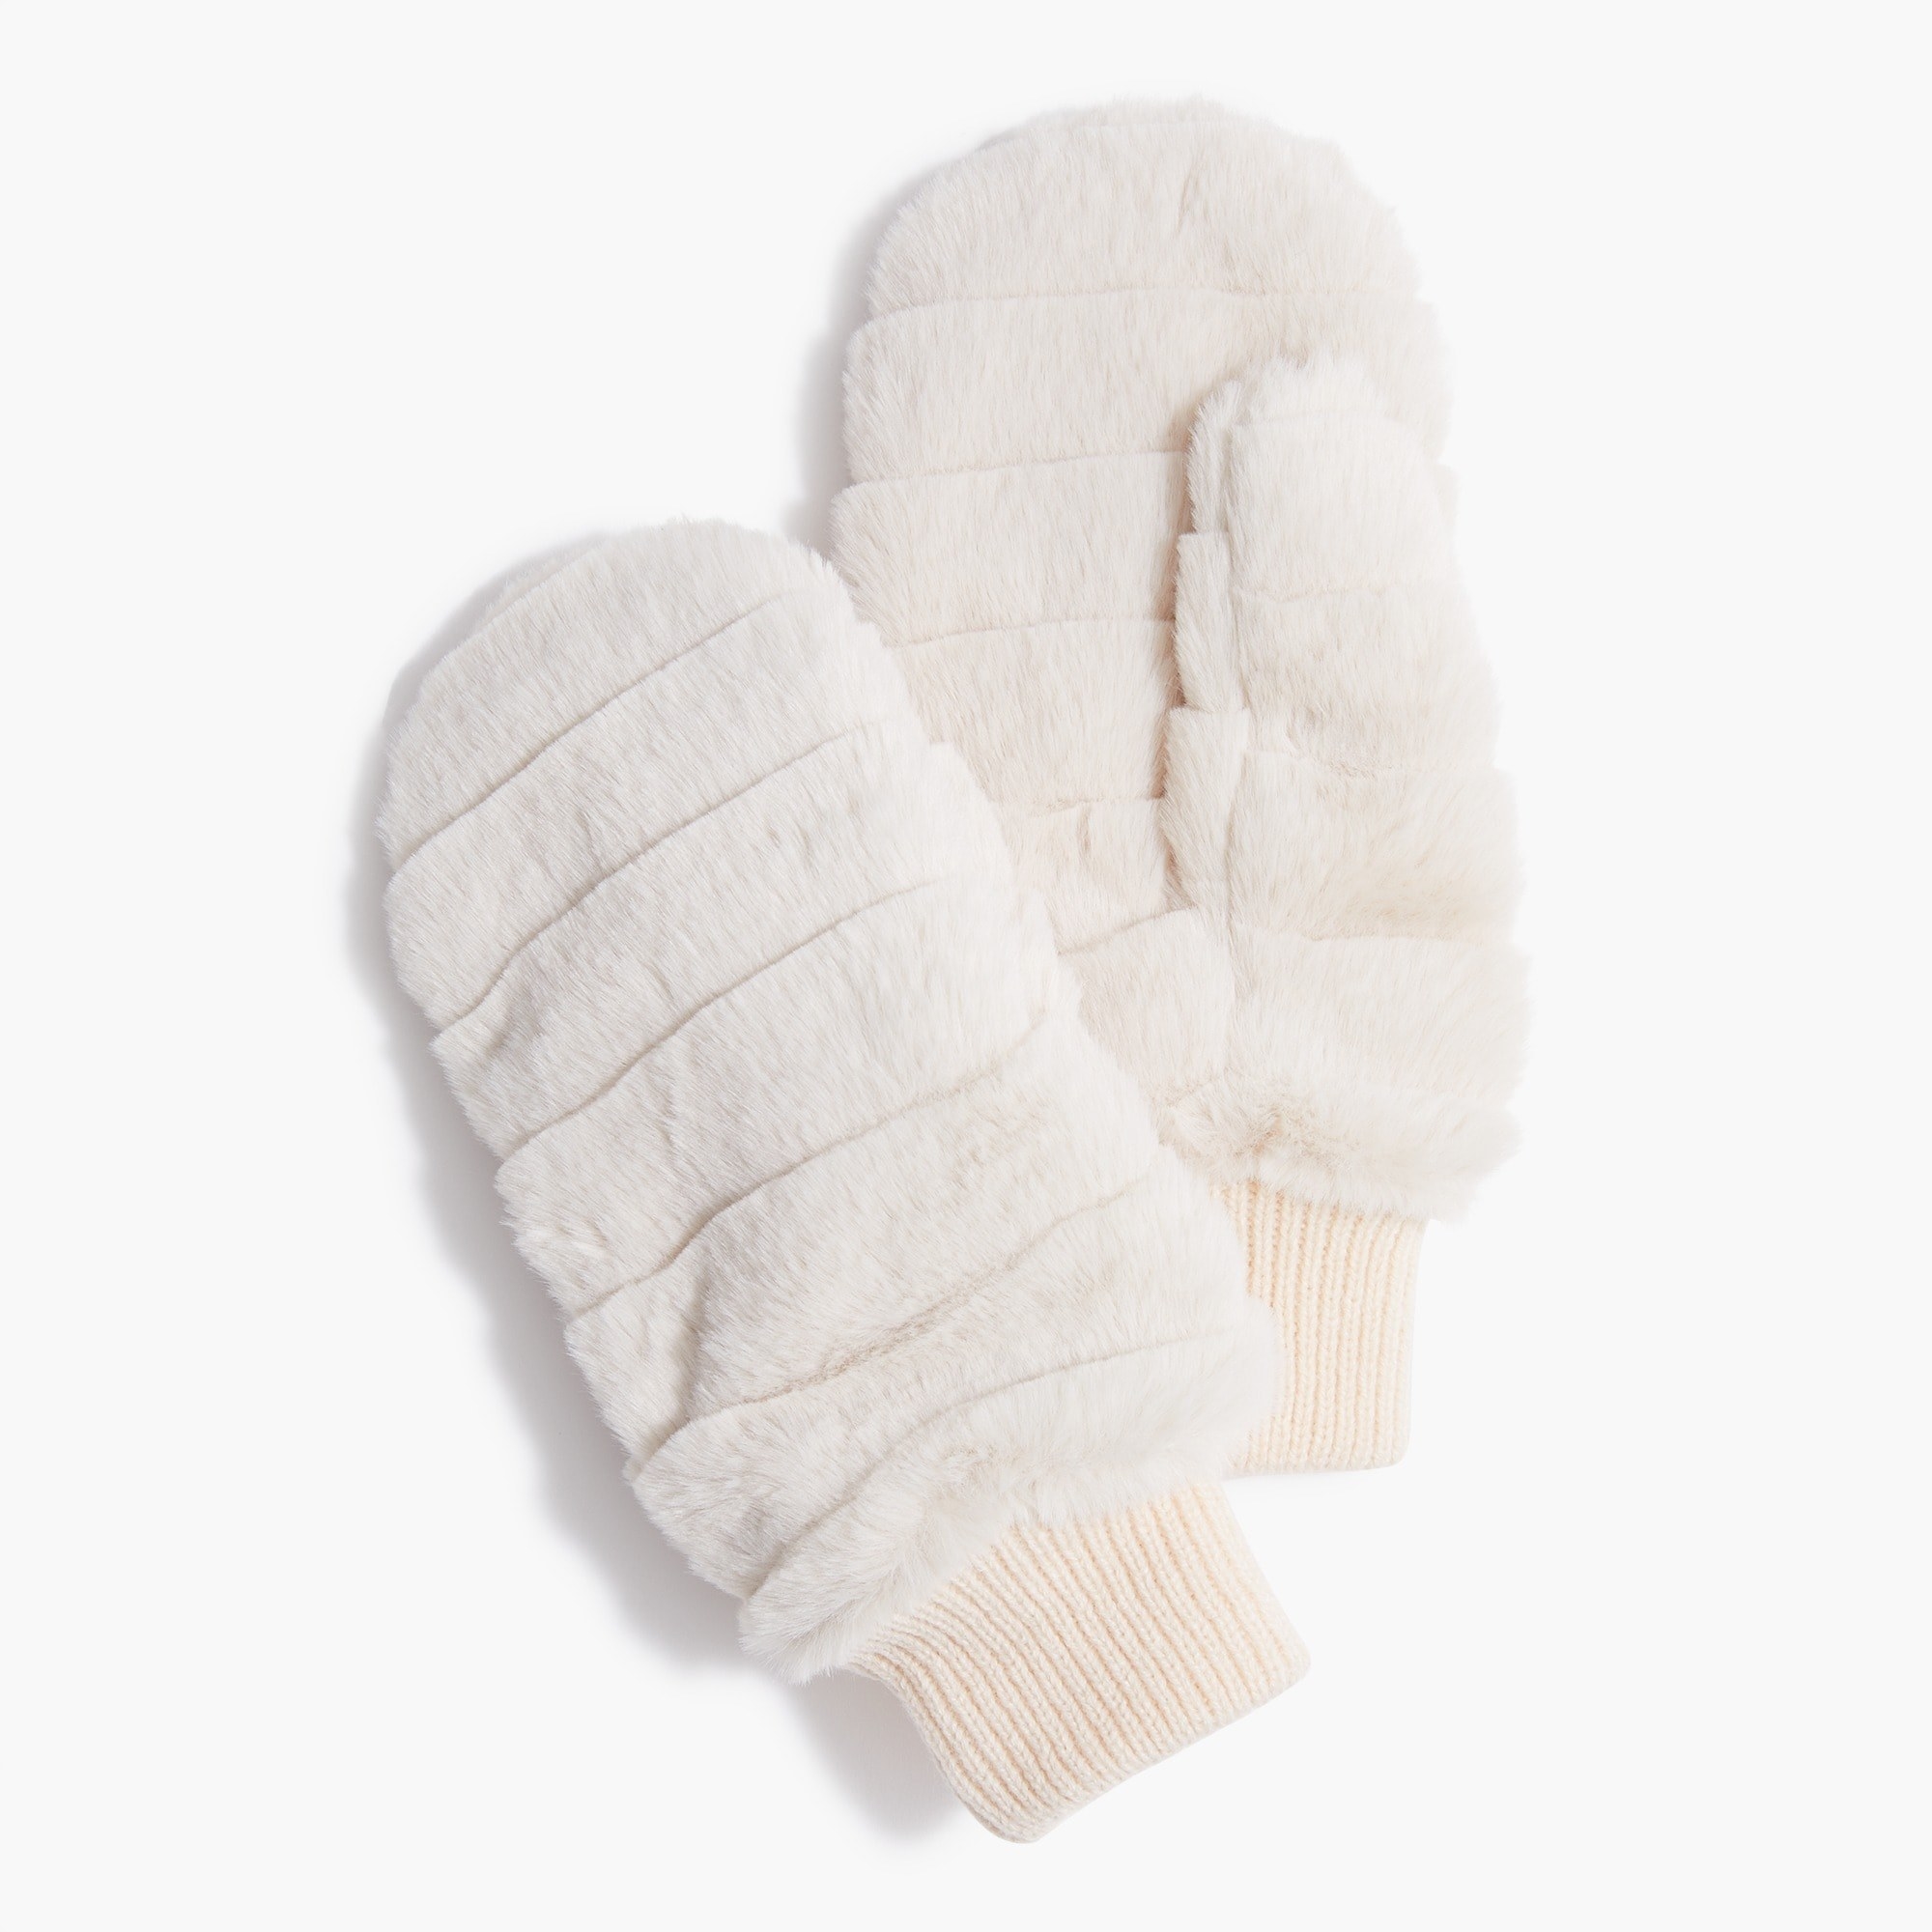 The ivory mittens with ribbed cuffs